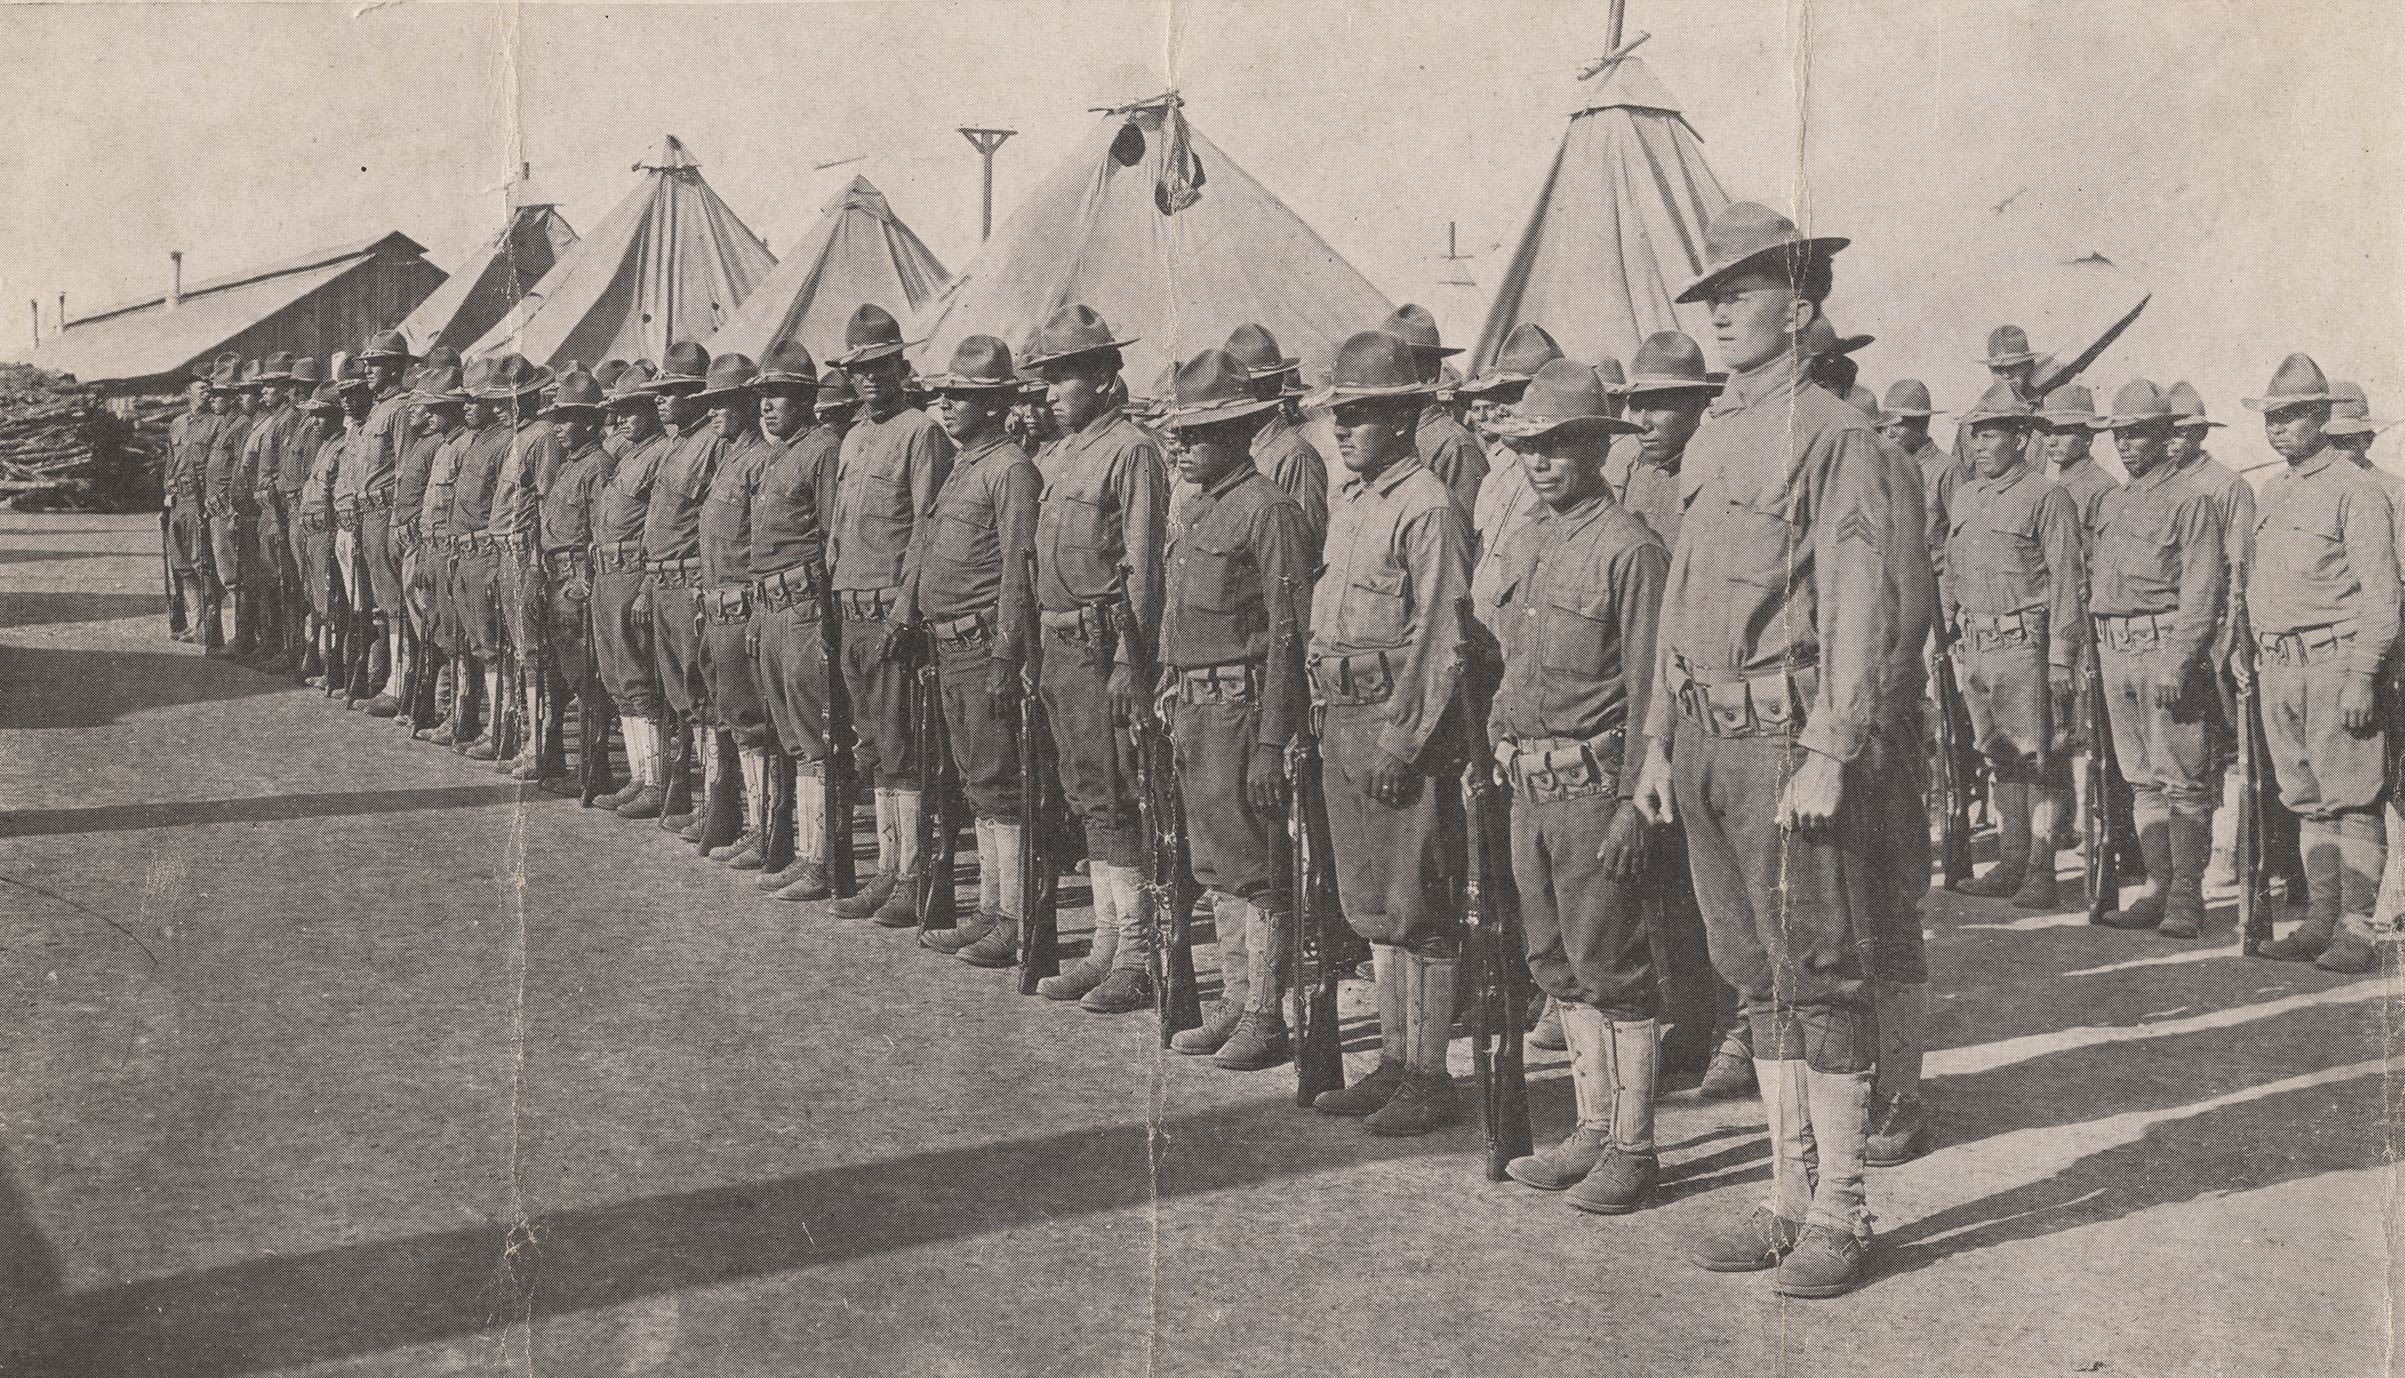 The American Indians who served with Company E, 142nd Infantry, 36th Division, during World War I were some of the nation's first "code-talkers" (National World War I Museum and Memorial)